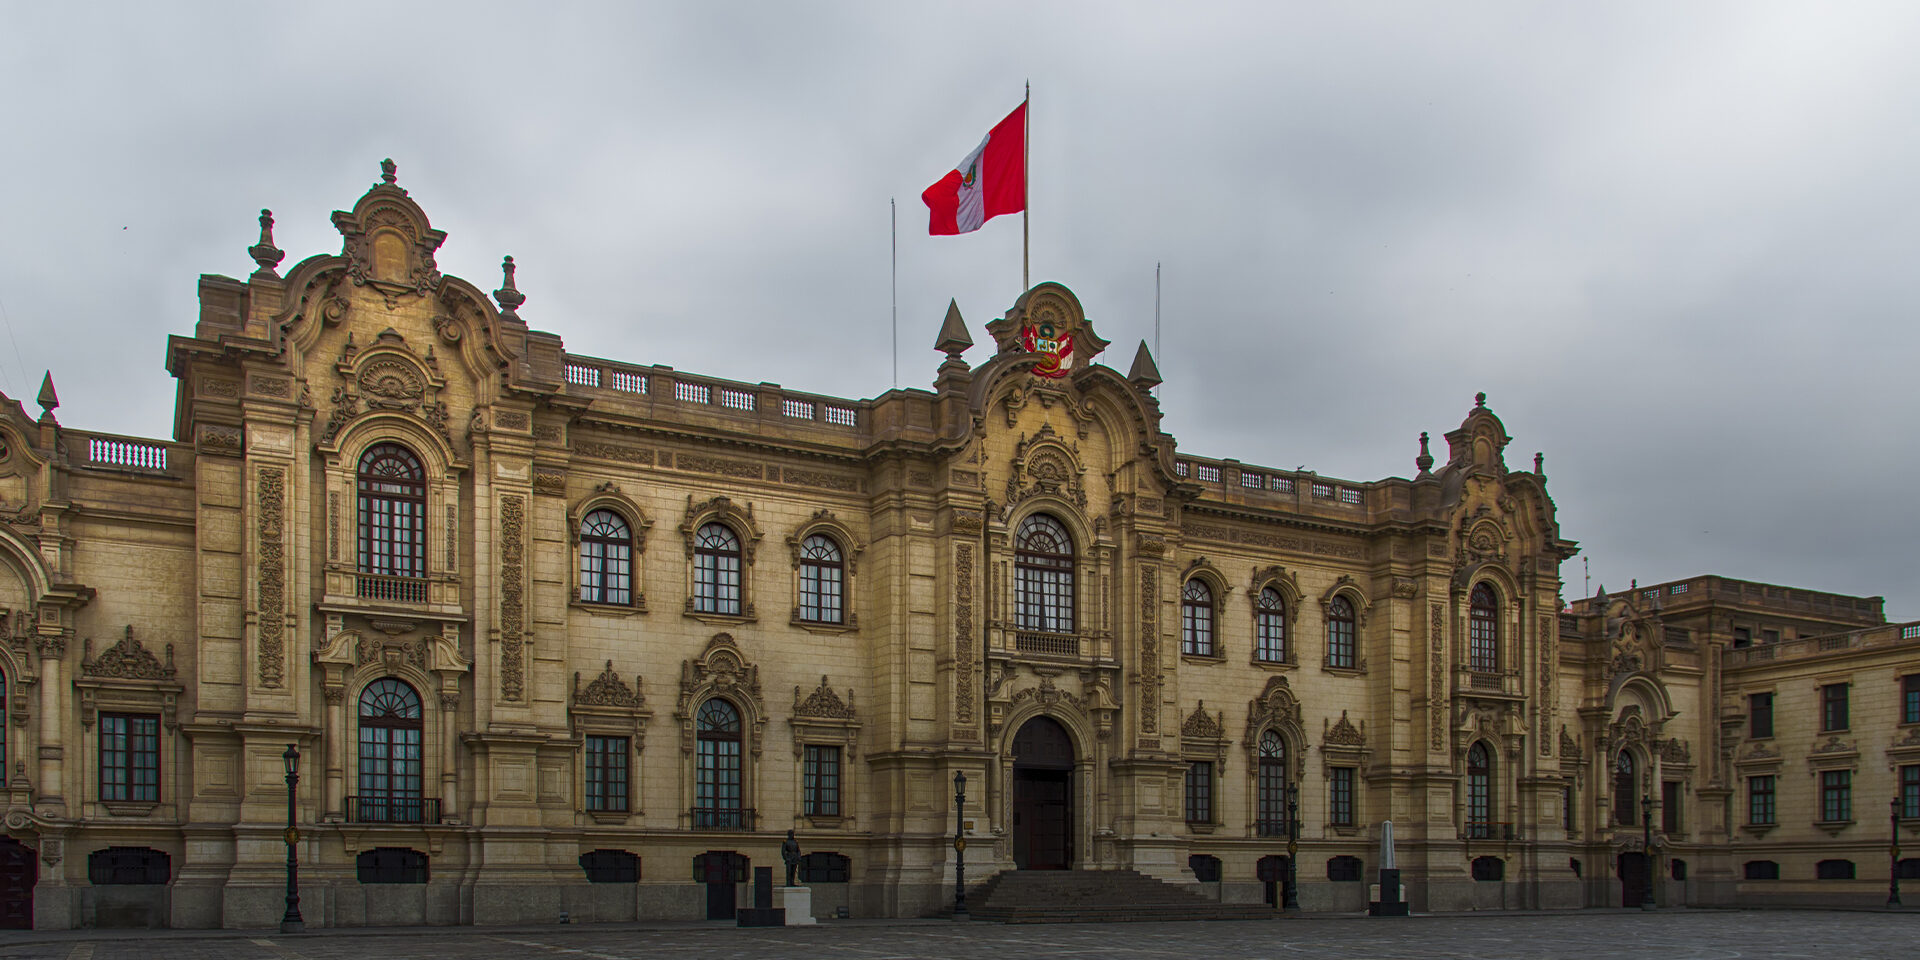 An elegant building with the Peruvian Flag waving from the rooftop.